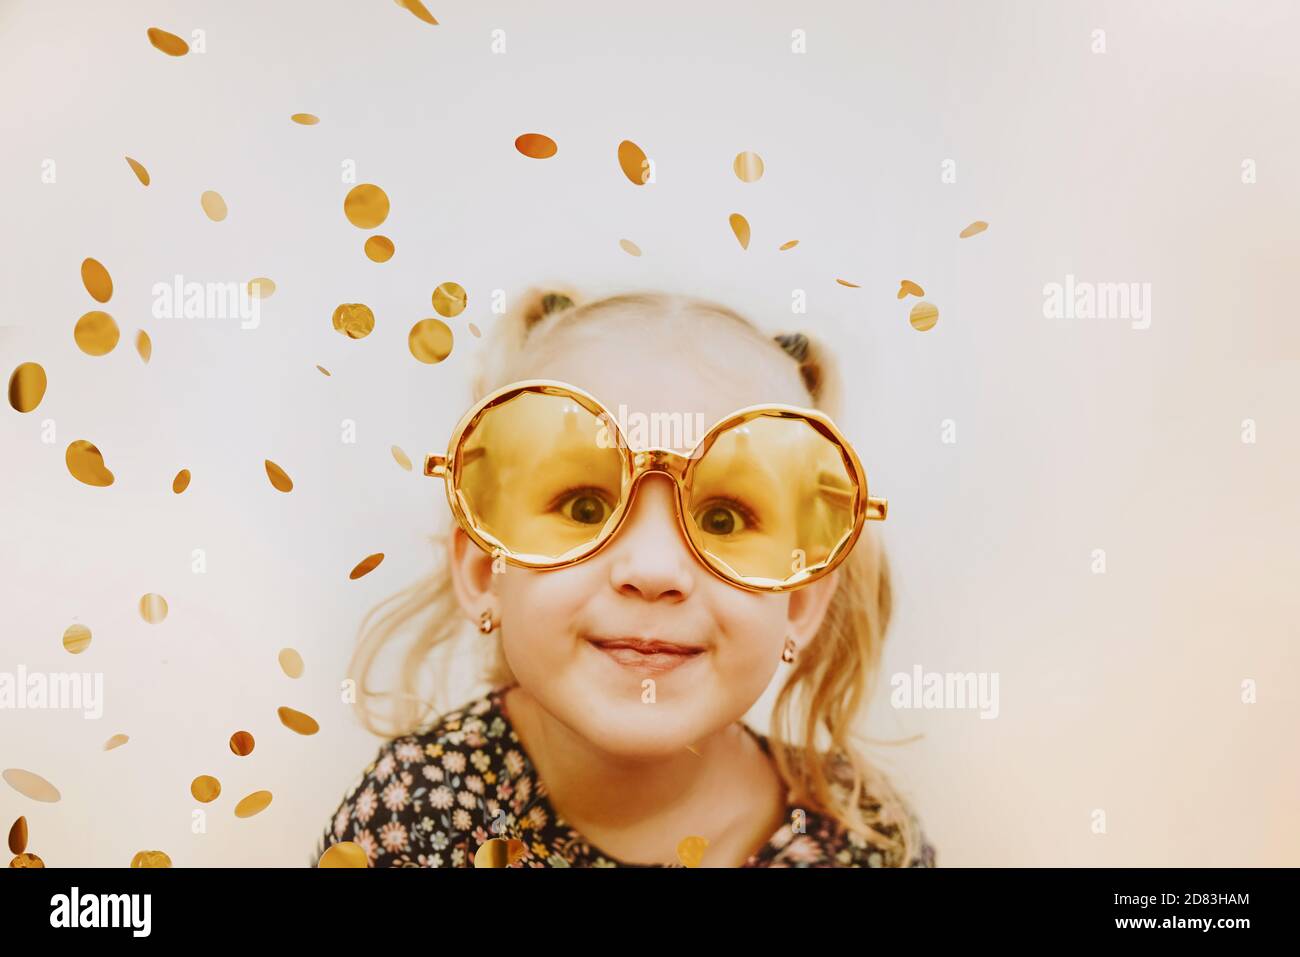 Little girl wearing gold masquerade glasses smiling and fooling around Stock Photo